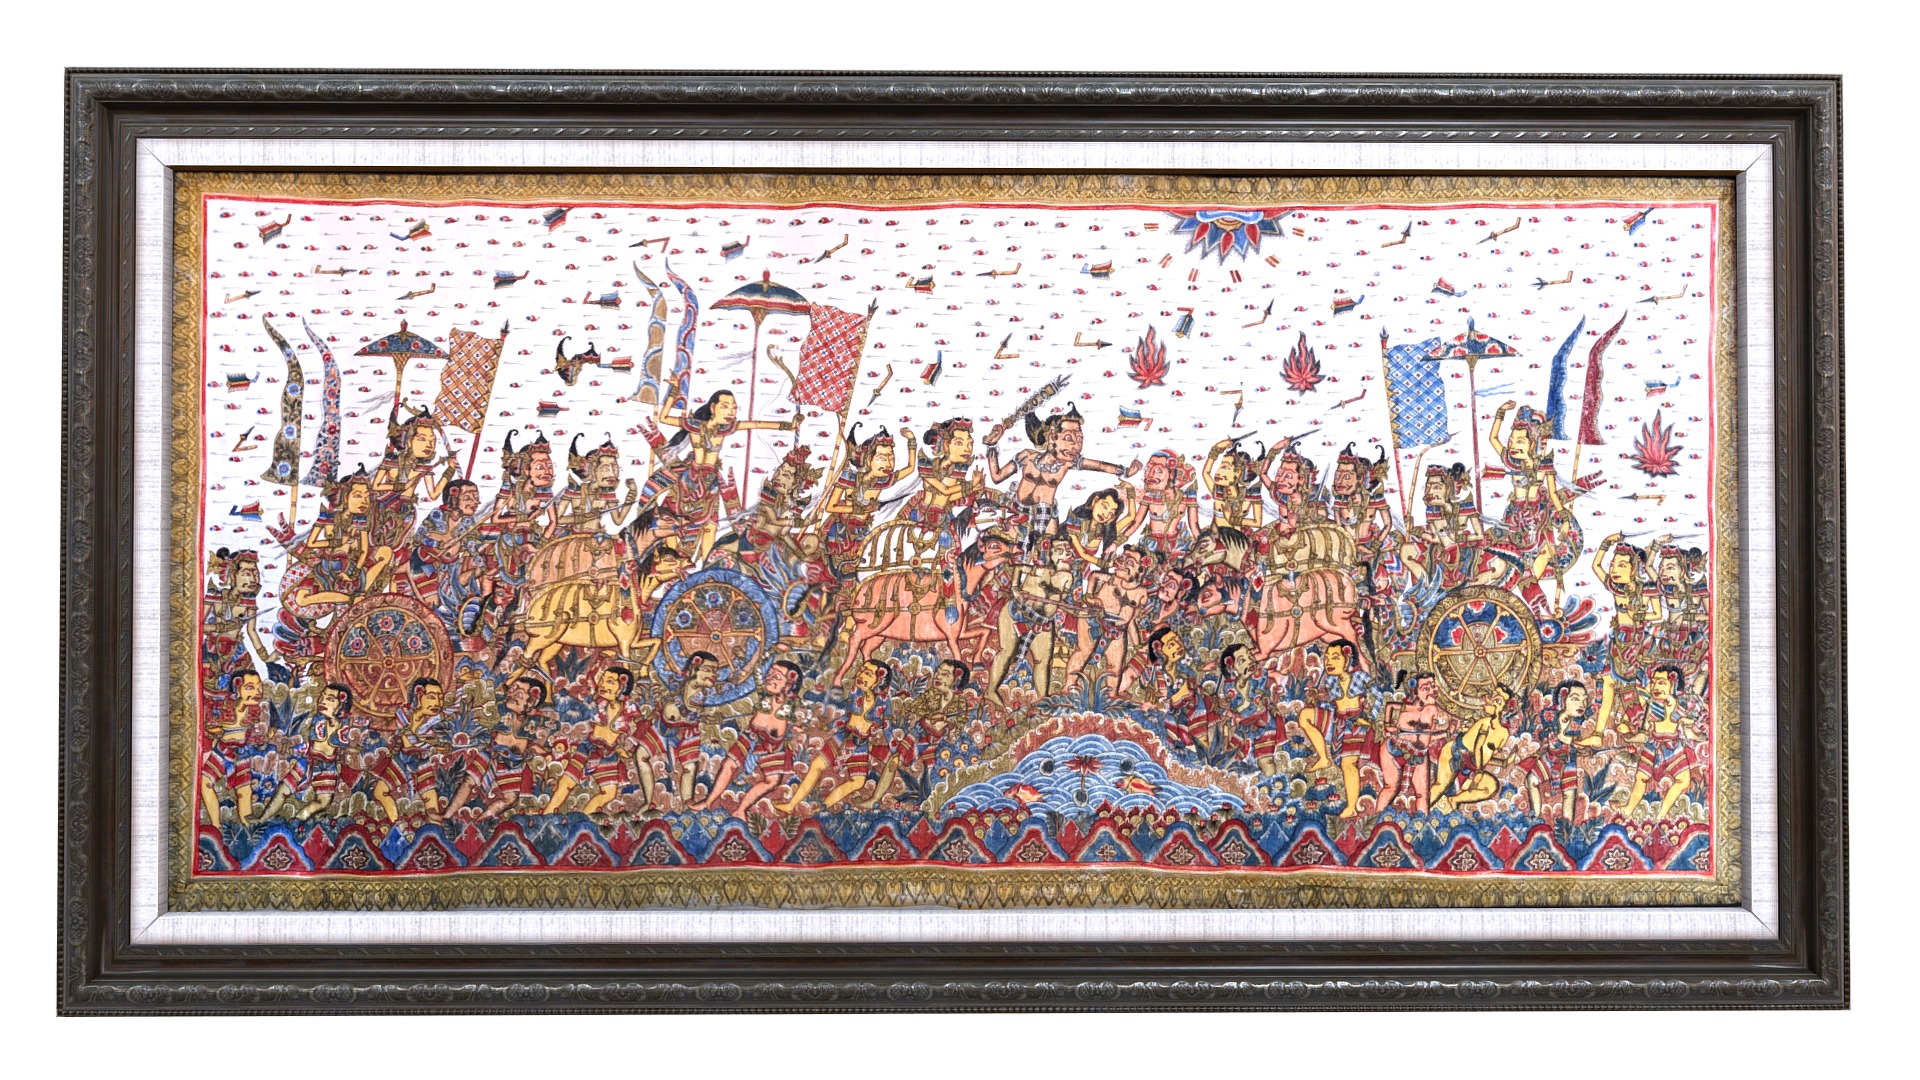 3D model Balinese picture wood frame great battle scene - This is a 3D model of the Balinese picture wood frame great battle scene. The 3D model is about a painting of a battle scene.